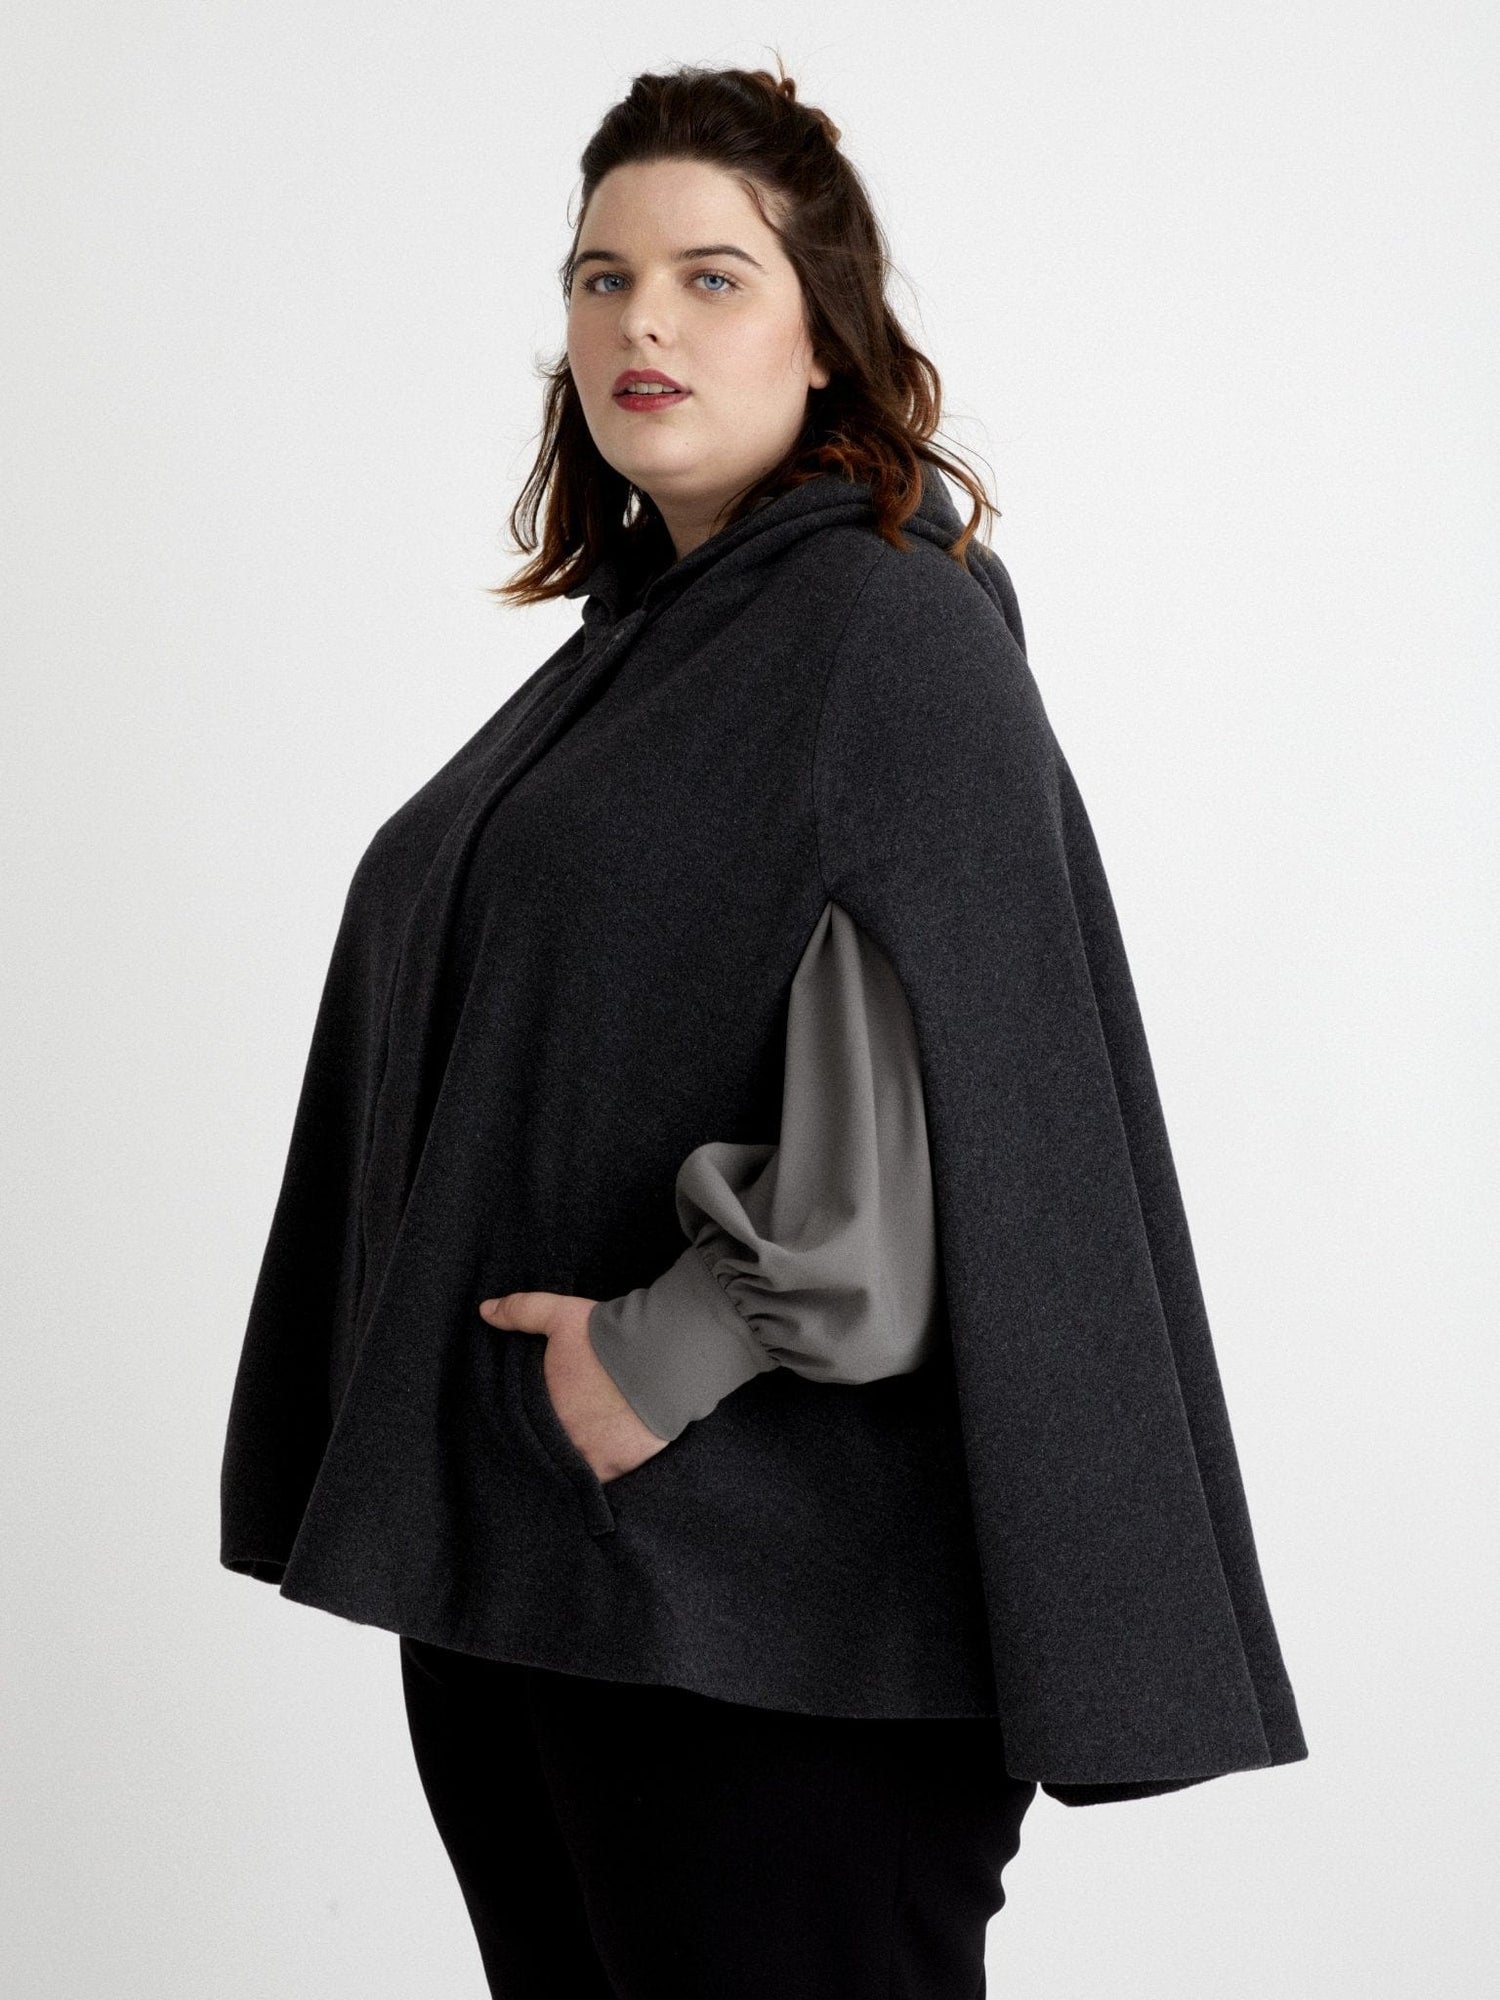 Designer clothing large size. Style in this gray cape, trendy and made in France